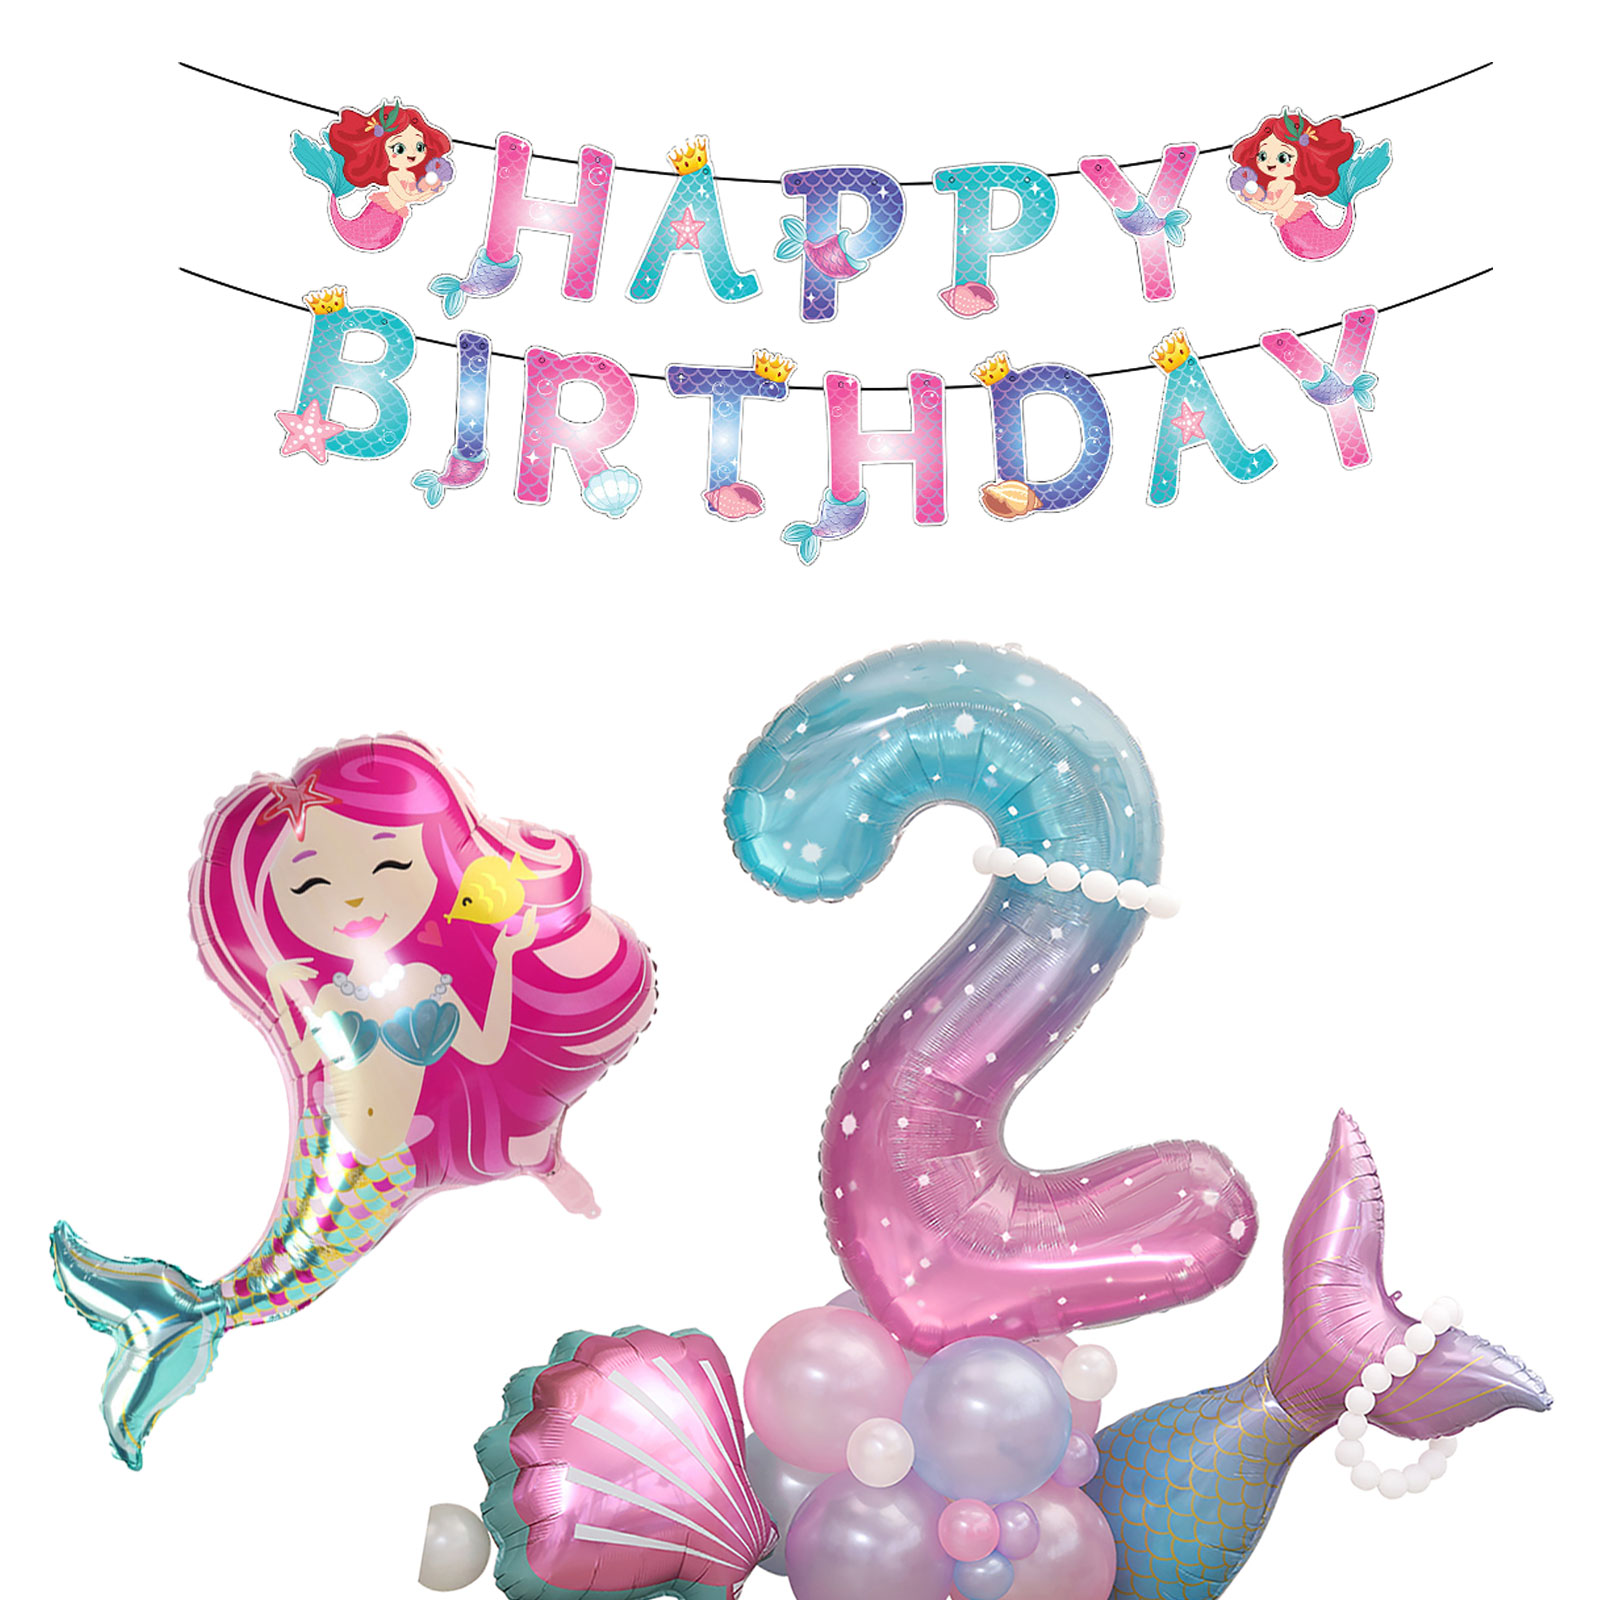  birthday decoration person fish .ba Rune set? mermaid Princess girl 1 -years old 2 -years old 3 -years old 4 -years old manner boat sea birthday party mermaid tail shell sea person fish equipment ornament 